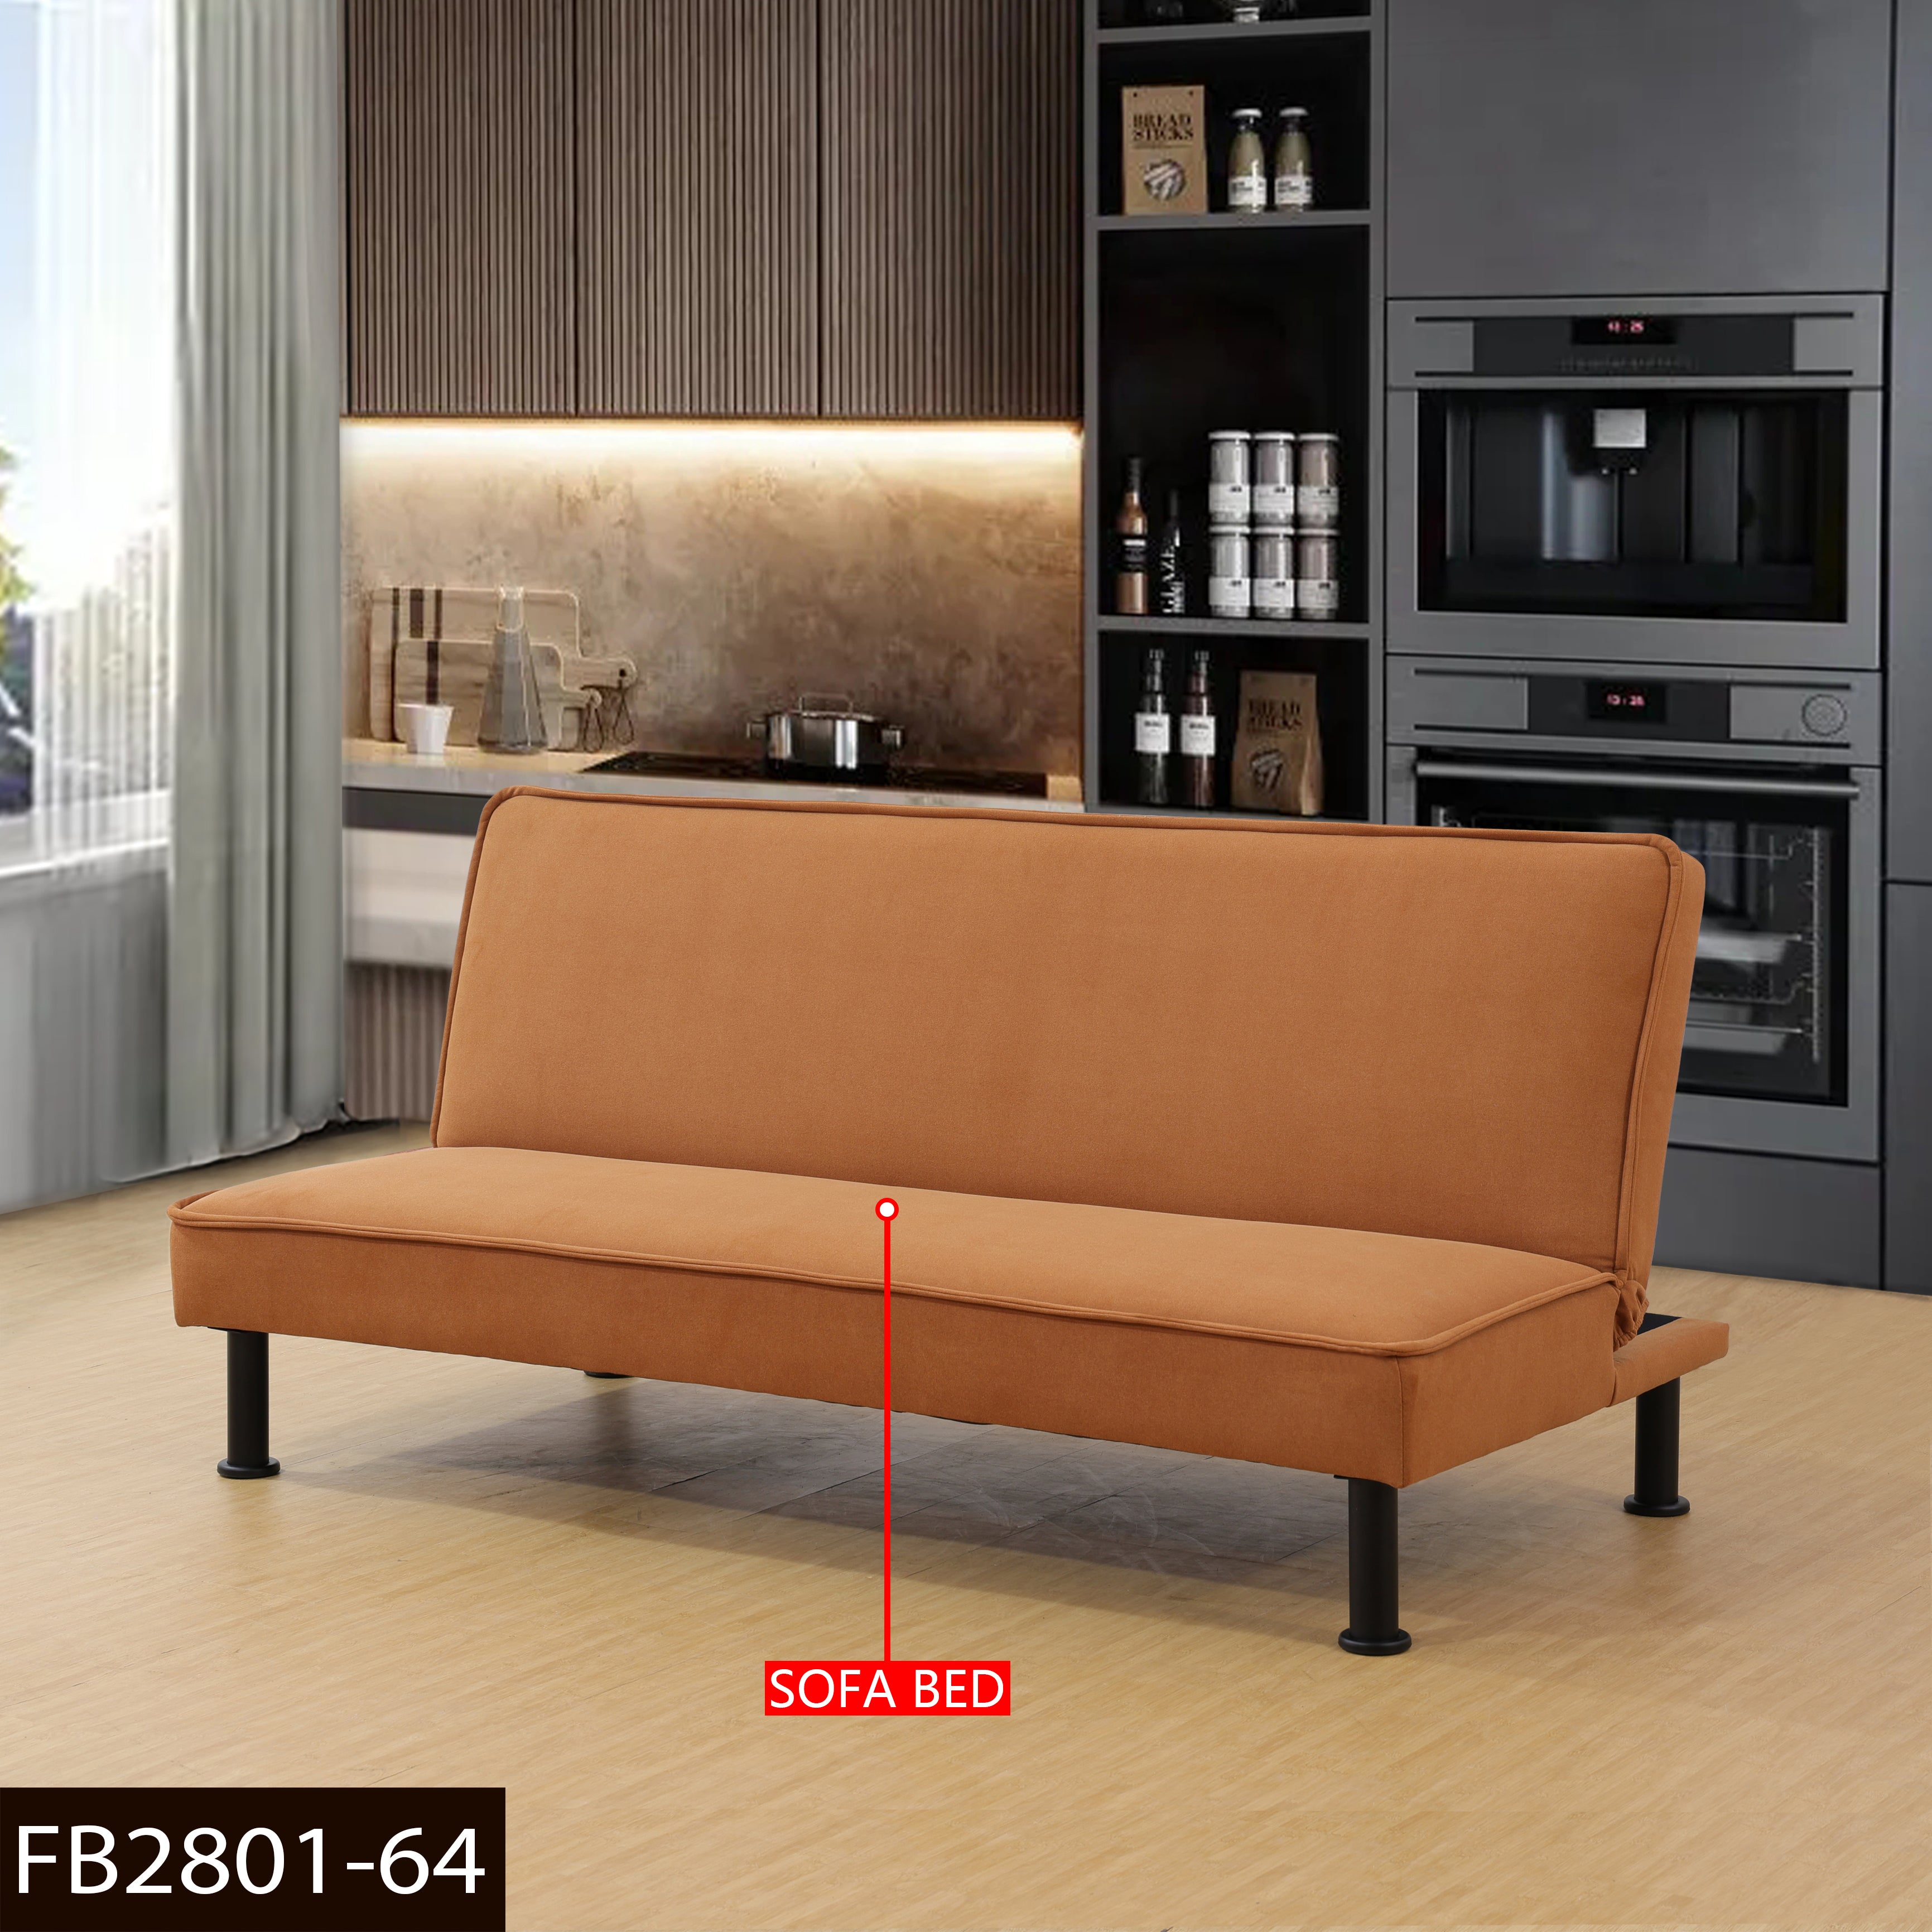 Ainehome Light Coffee Flannel Sofa bed